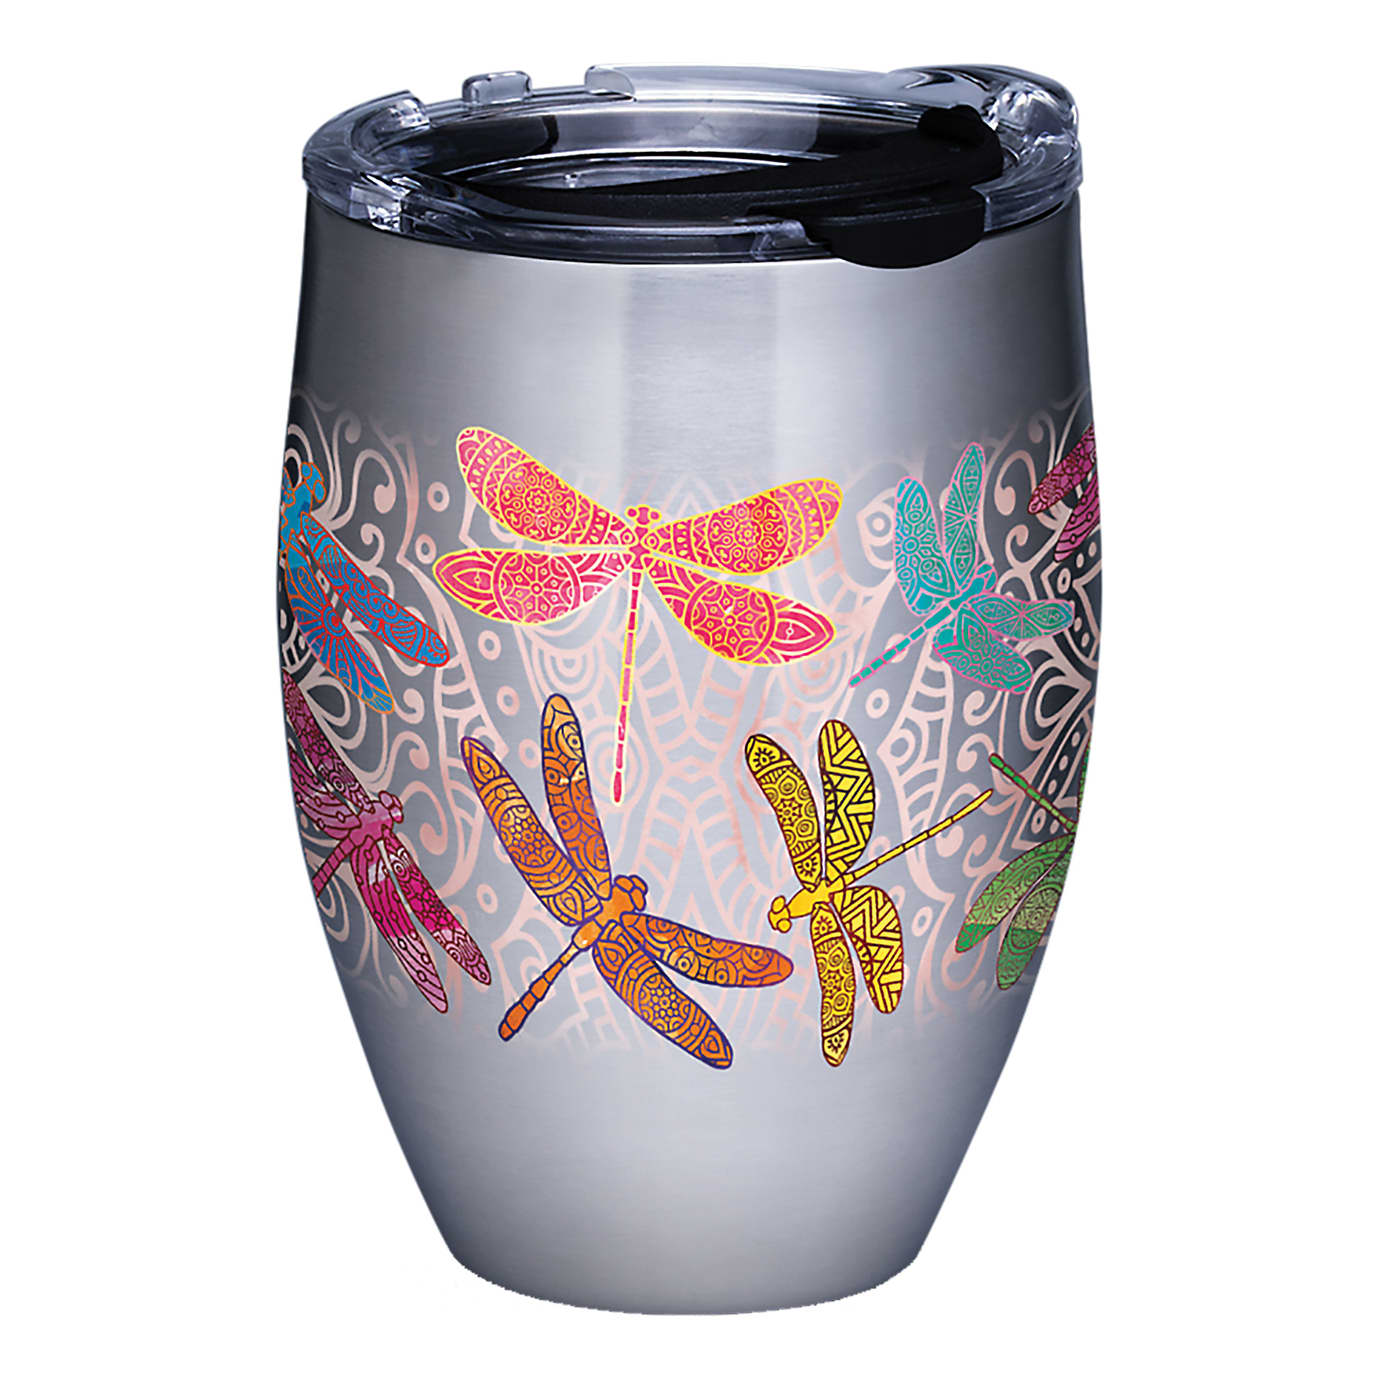 Tervis 12 oz. Stainless Steel Tumblers - Dragonfly Mandala